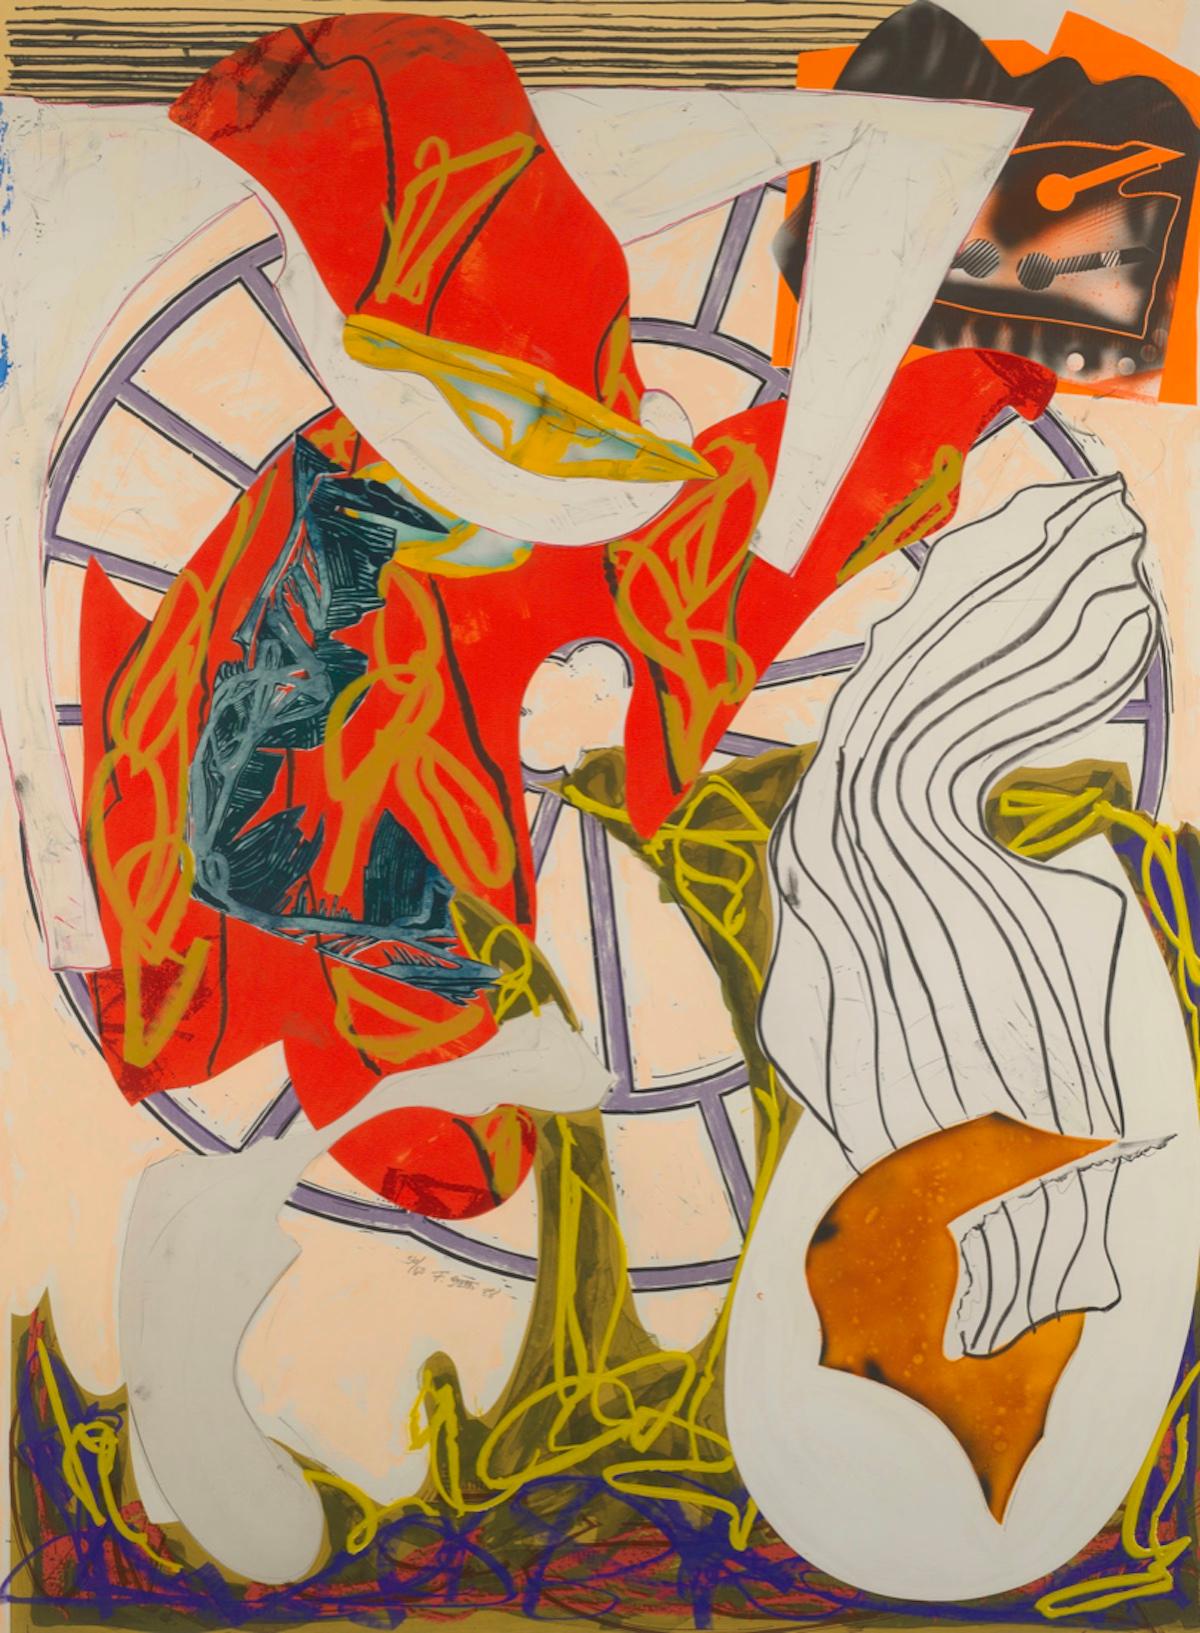 Frank Stella 'A Squeeze of the Hand' 1985-8